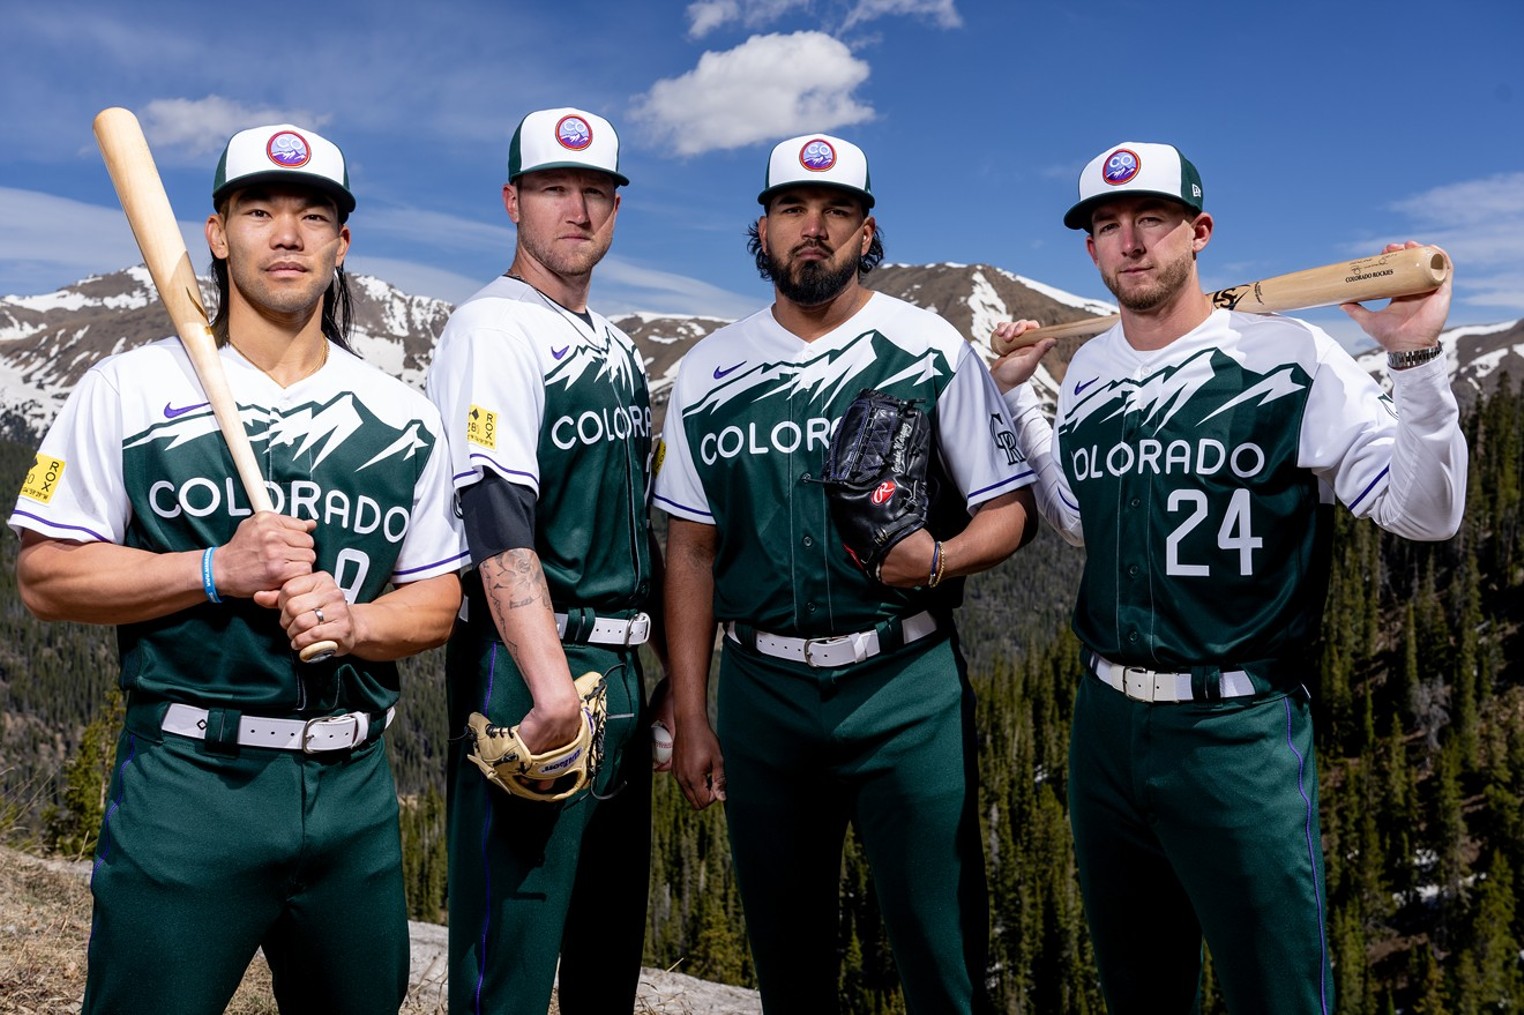 Colorado Rockies: Getting to know Connor Joe and the week that was